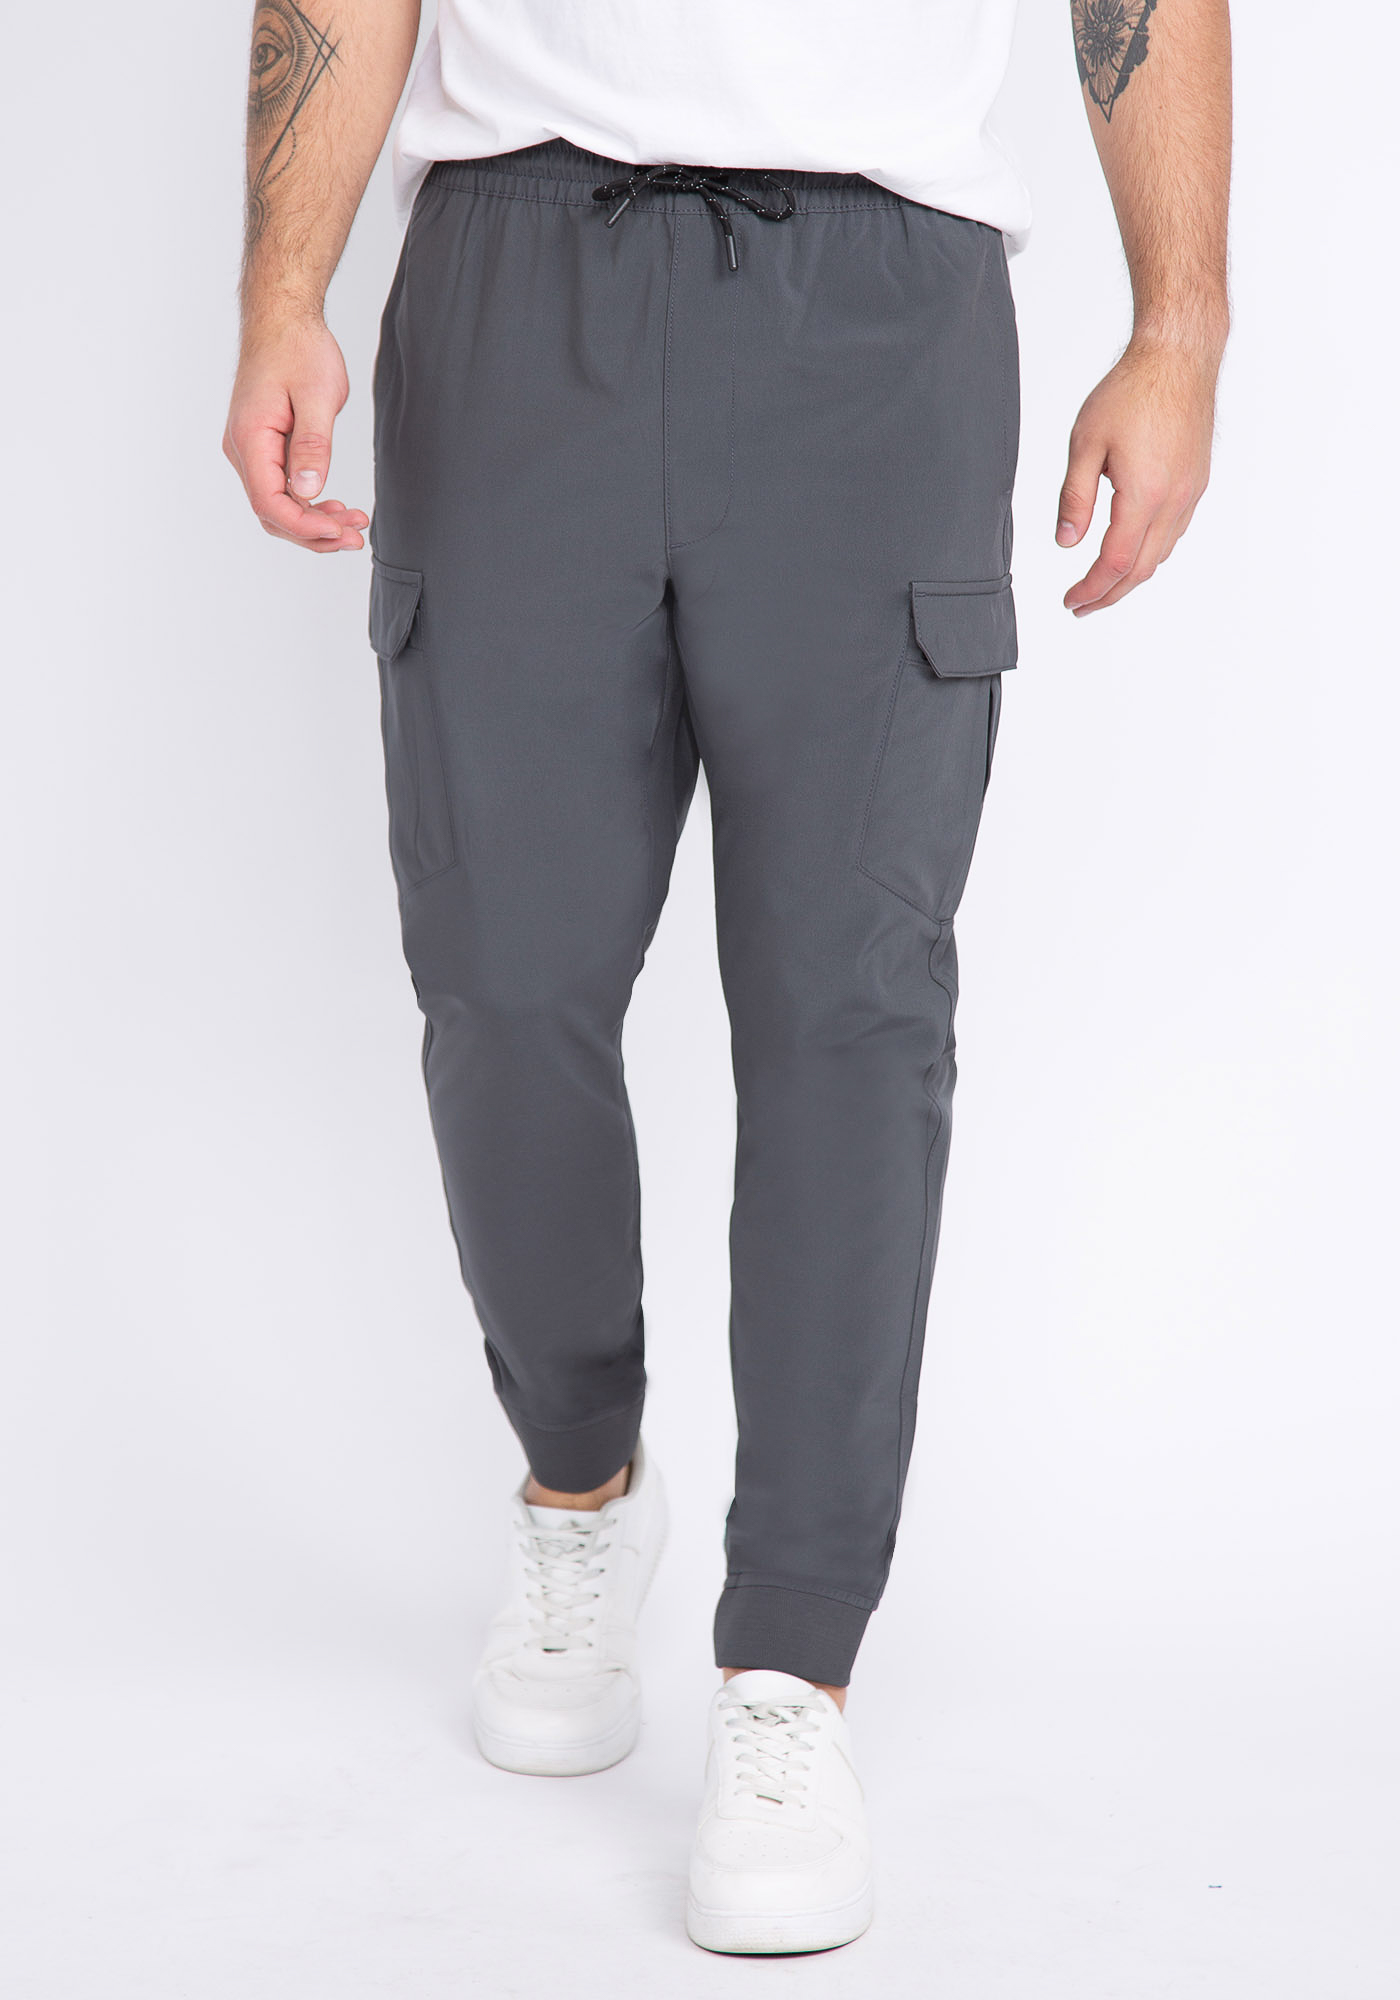 Men's cotton cargo joggers pant Manufacturer, Supplier in New